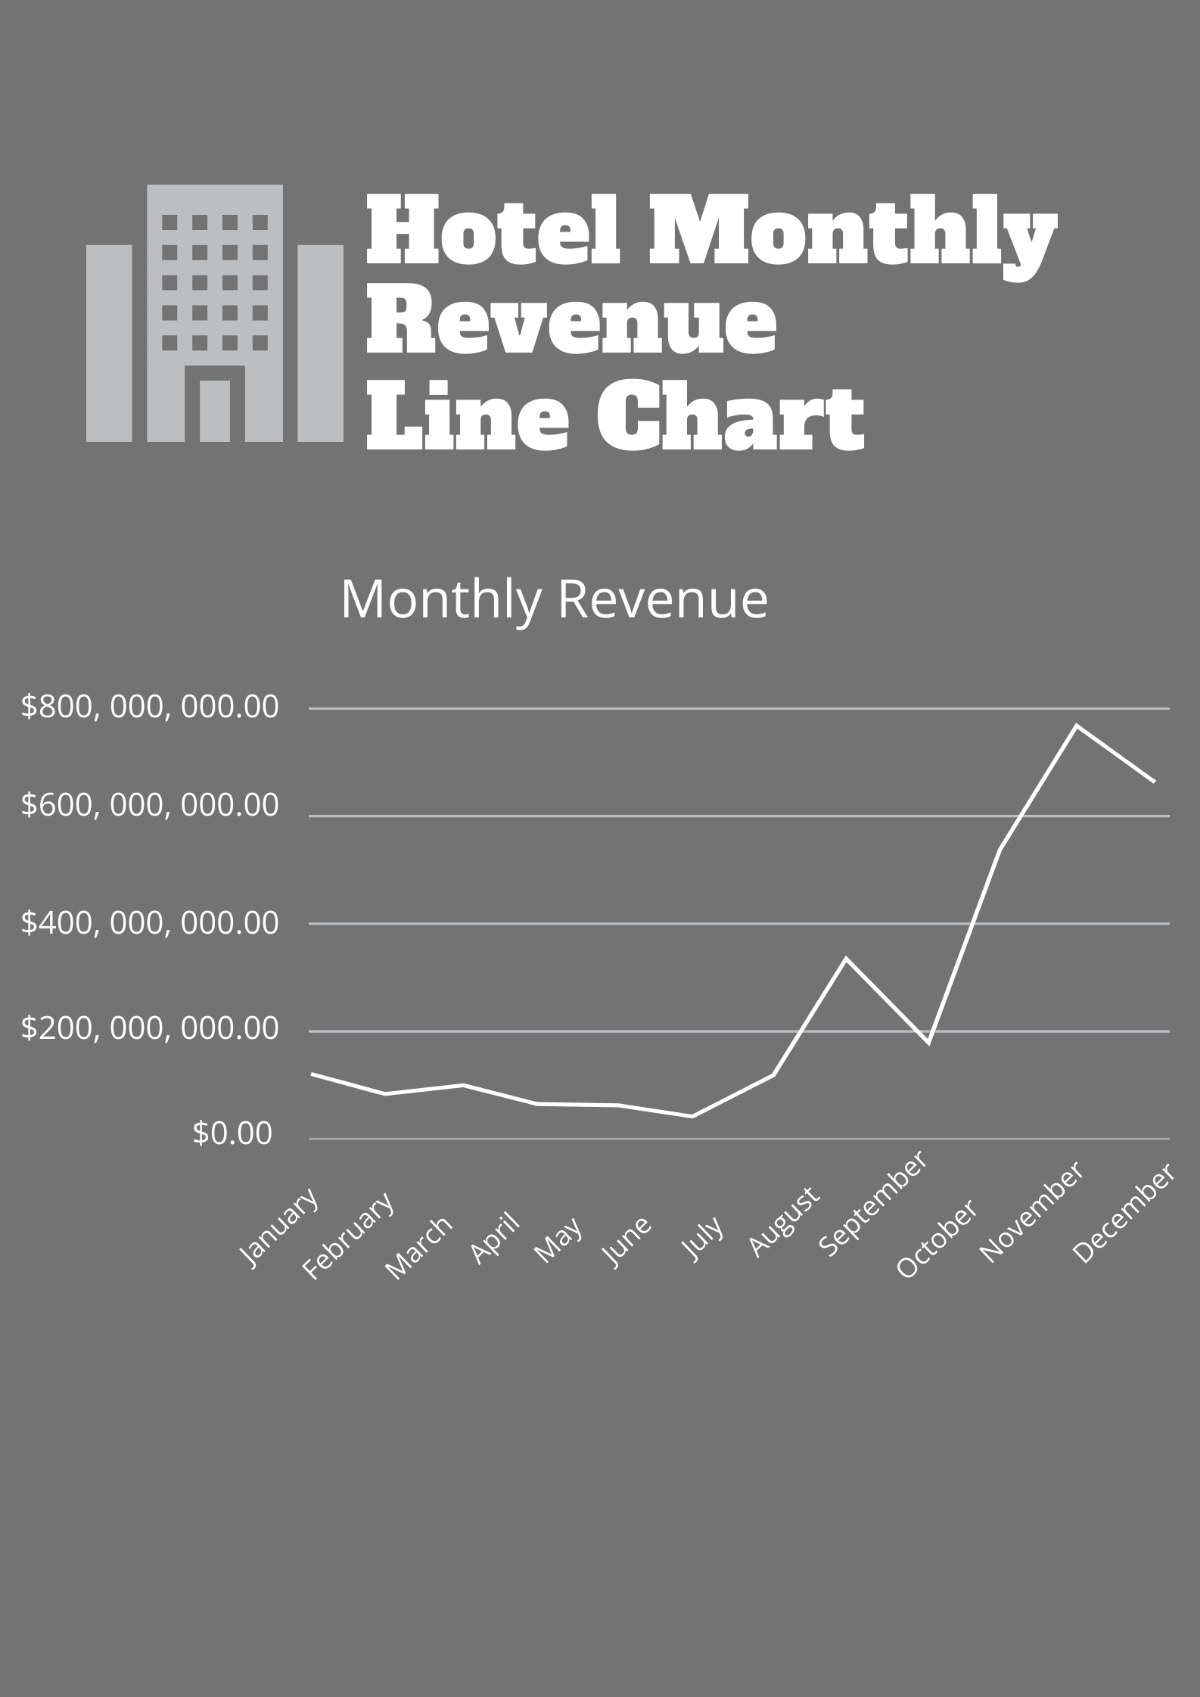 Hotel Monthly Revenue Line Chart Template